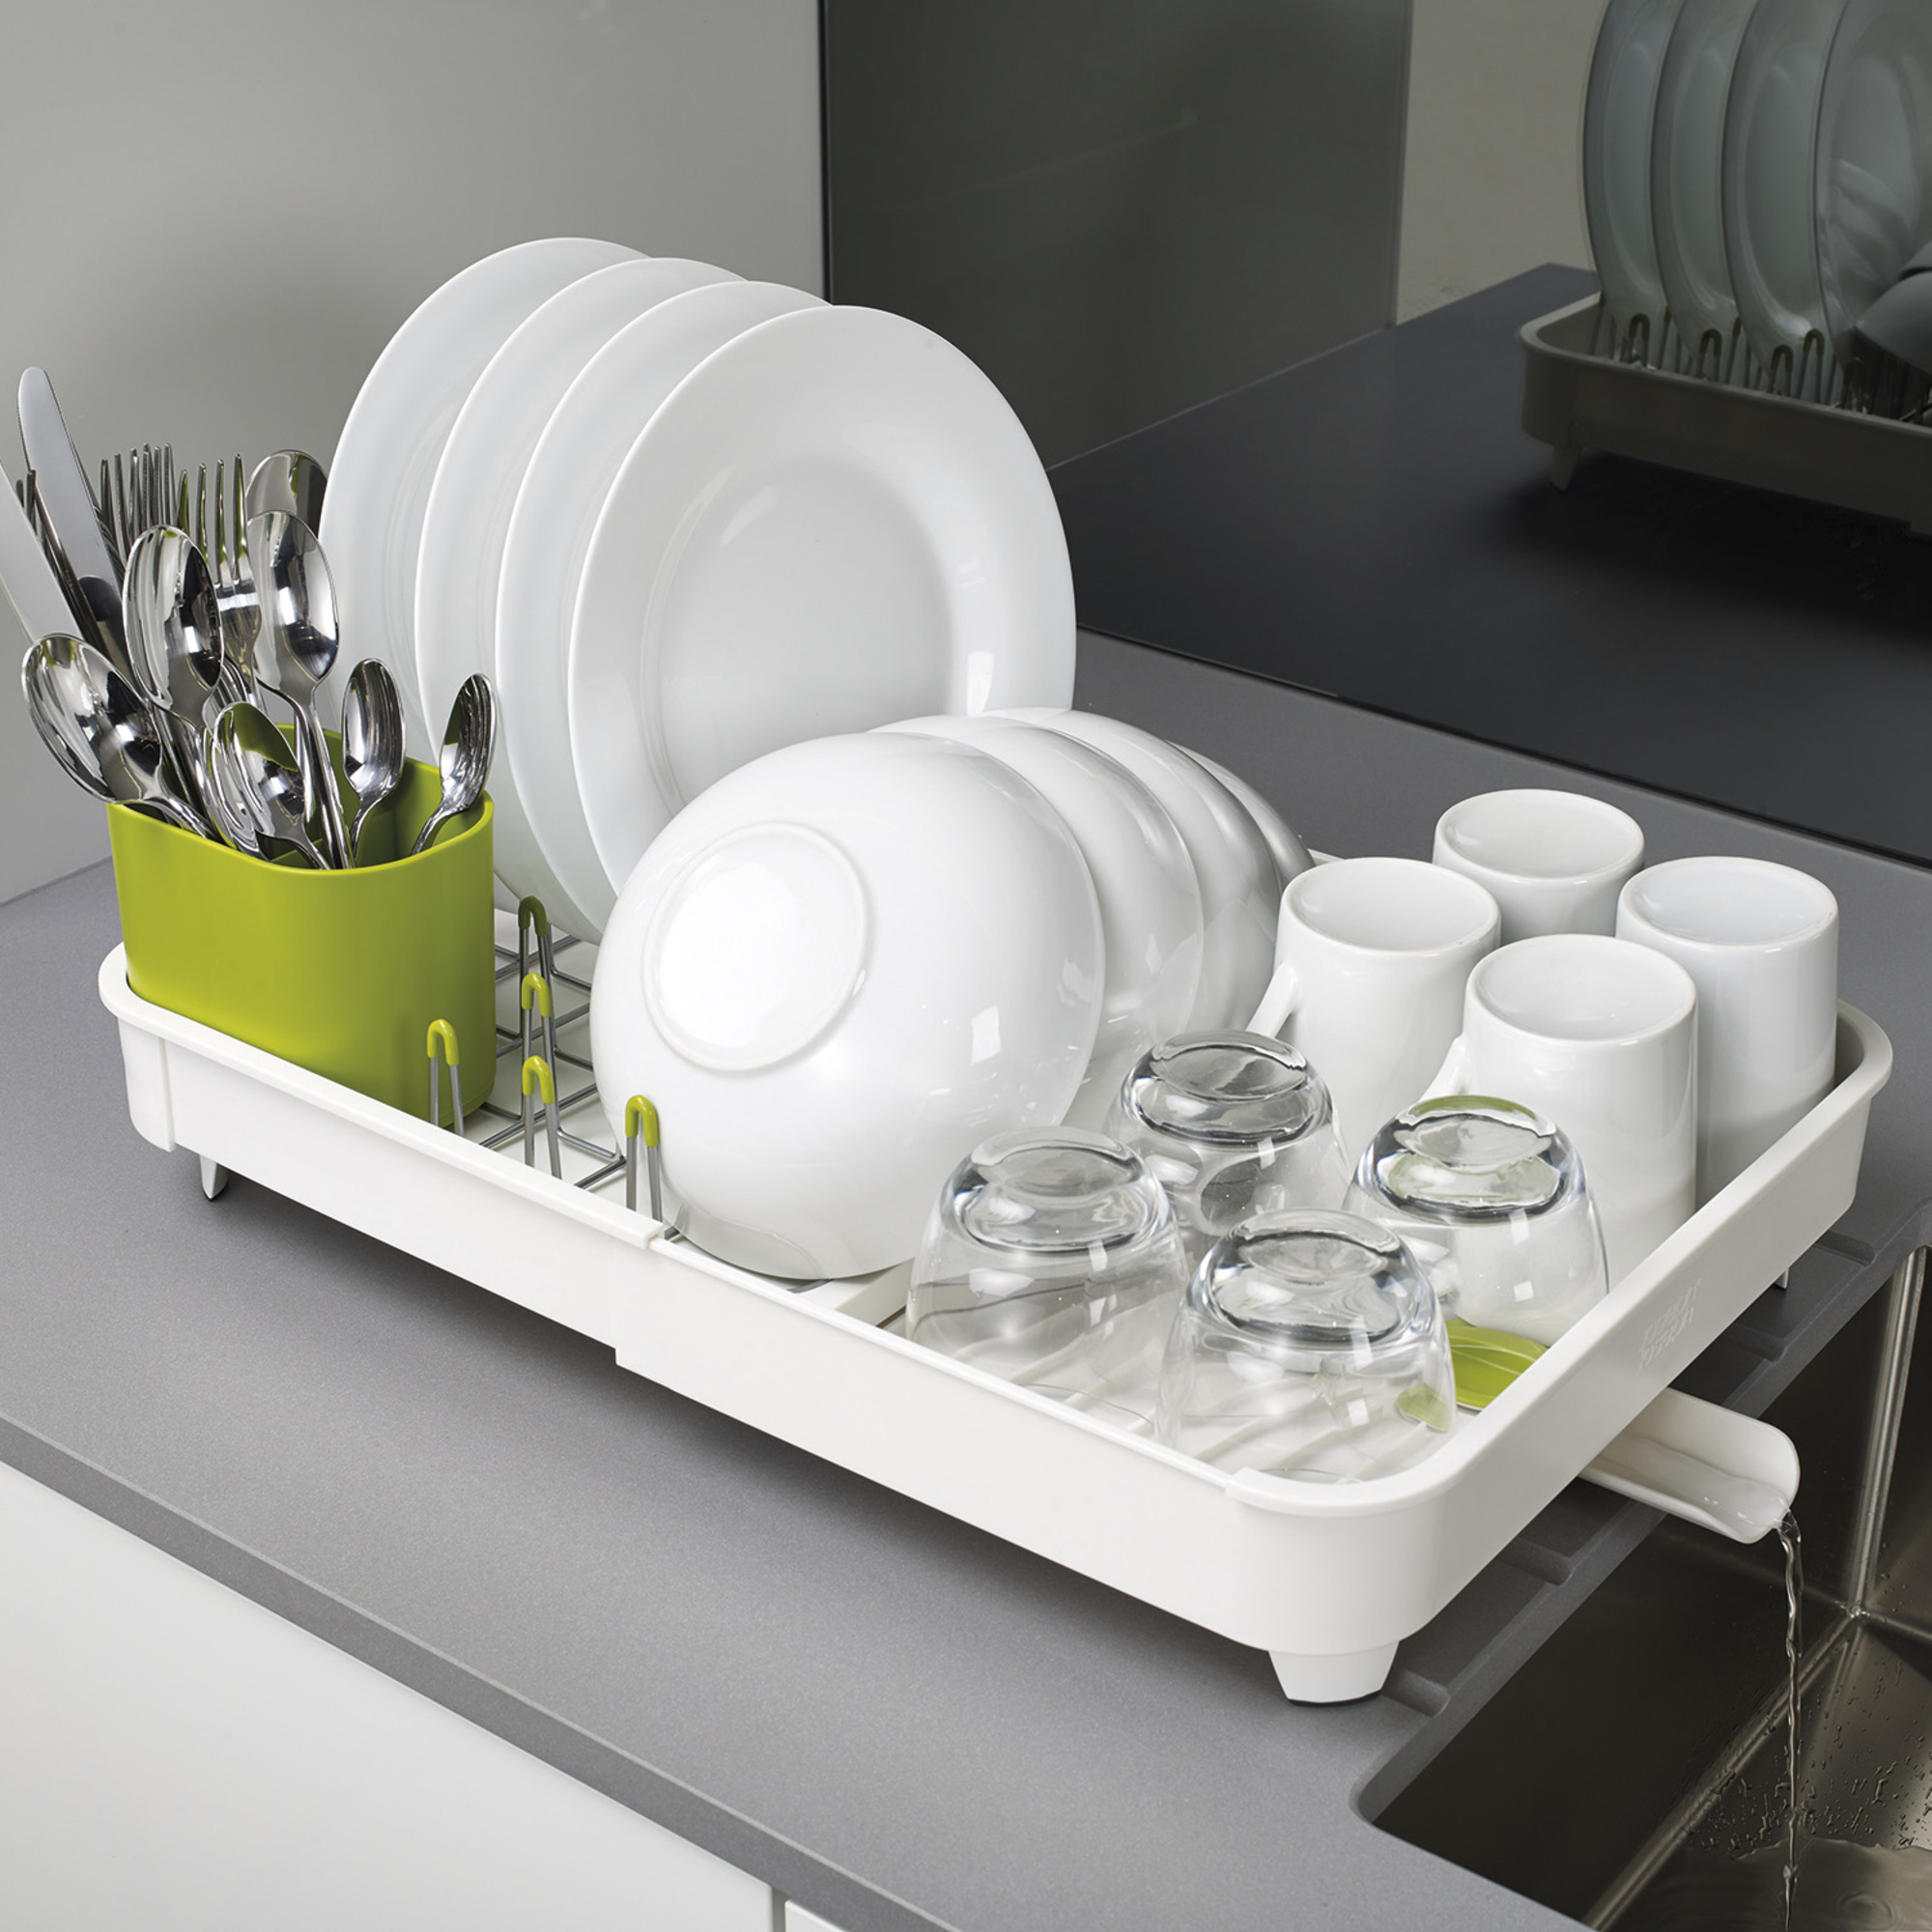 Whitgo whitgo dish drying rack with drain board, stainless steel dish